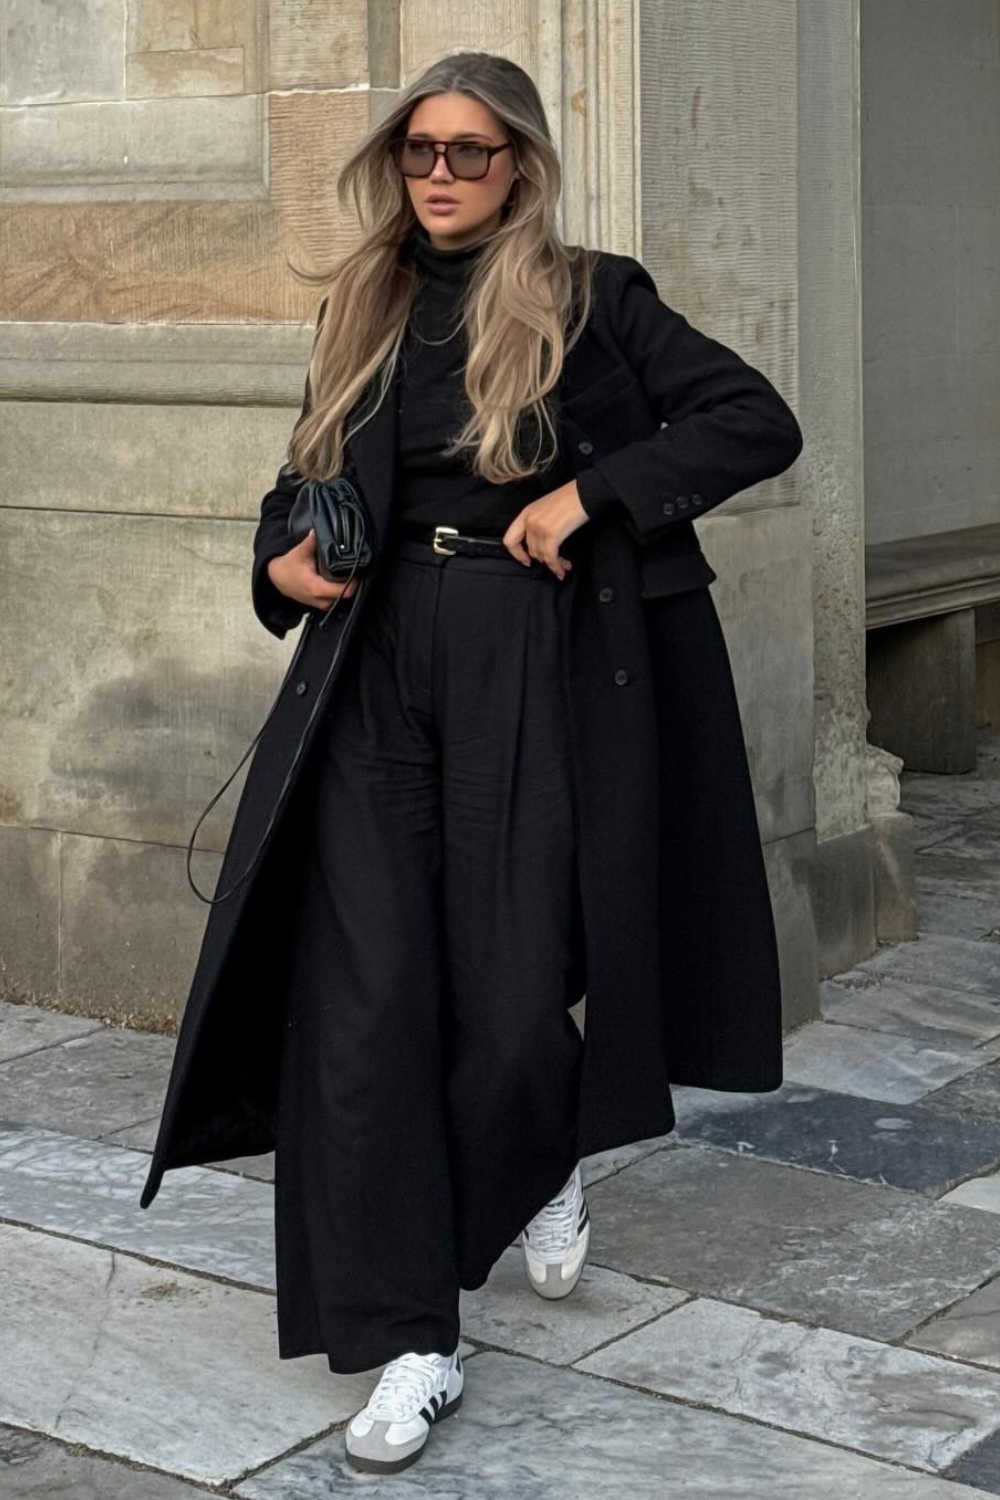 Black pants with black sweater and black coat outfit